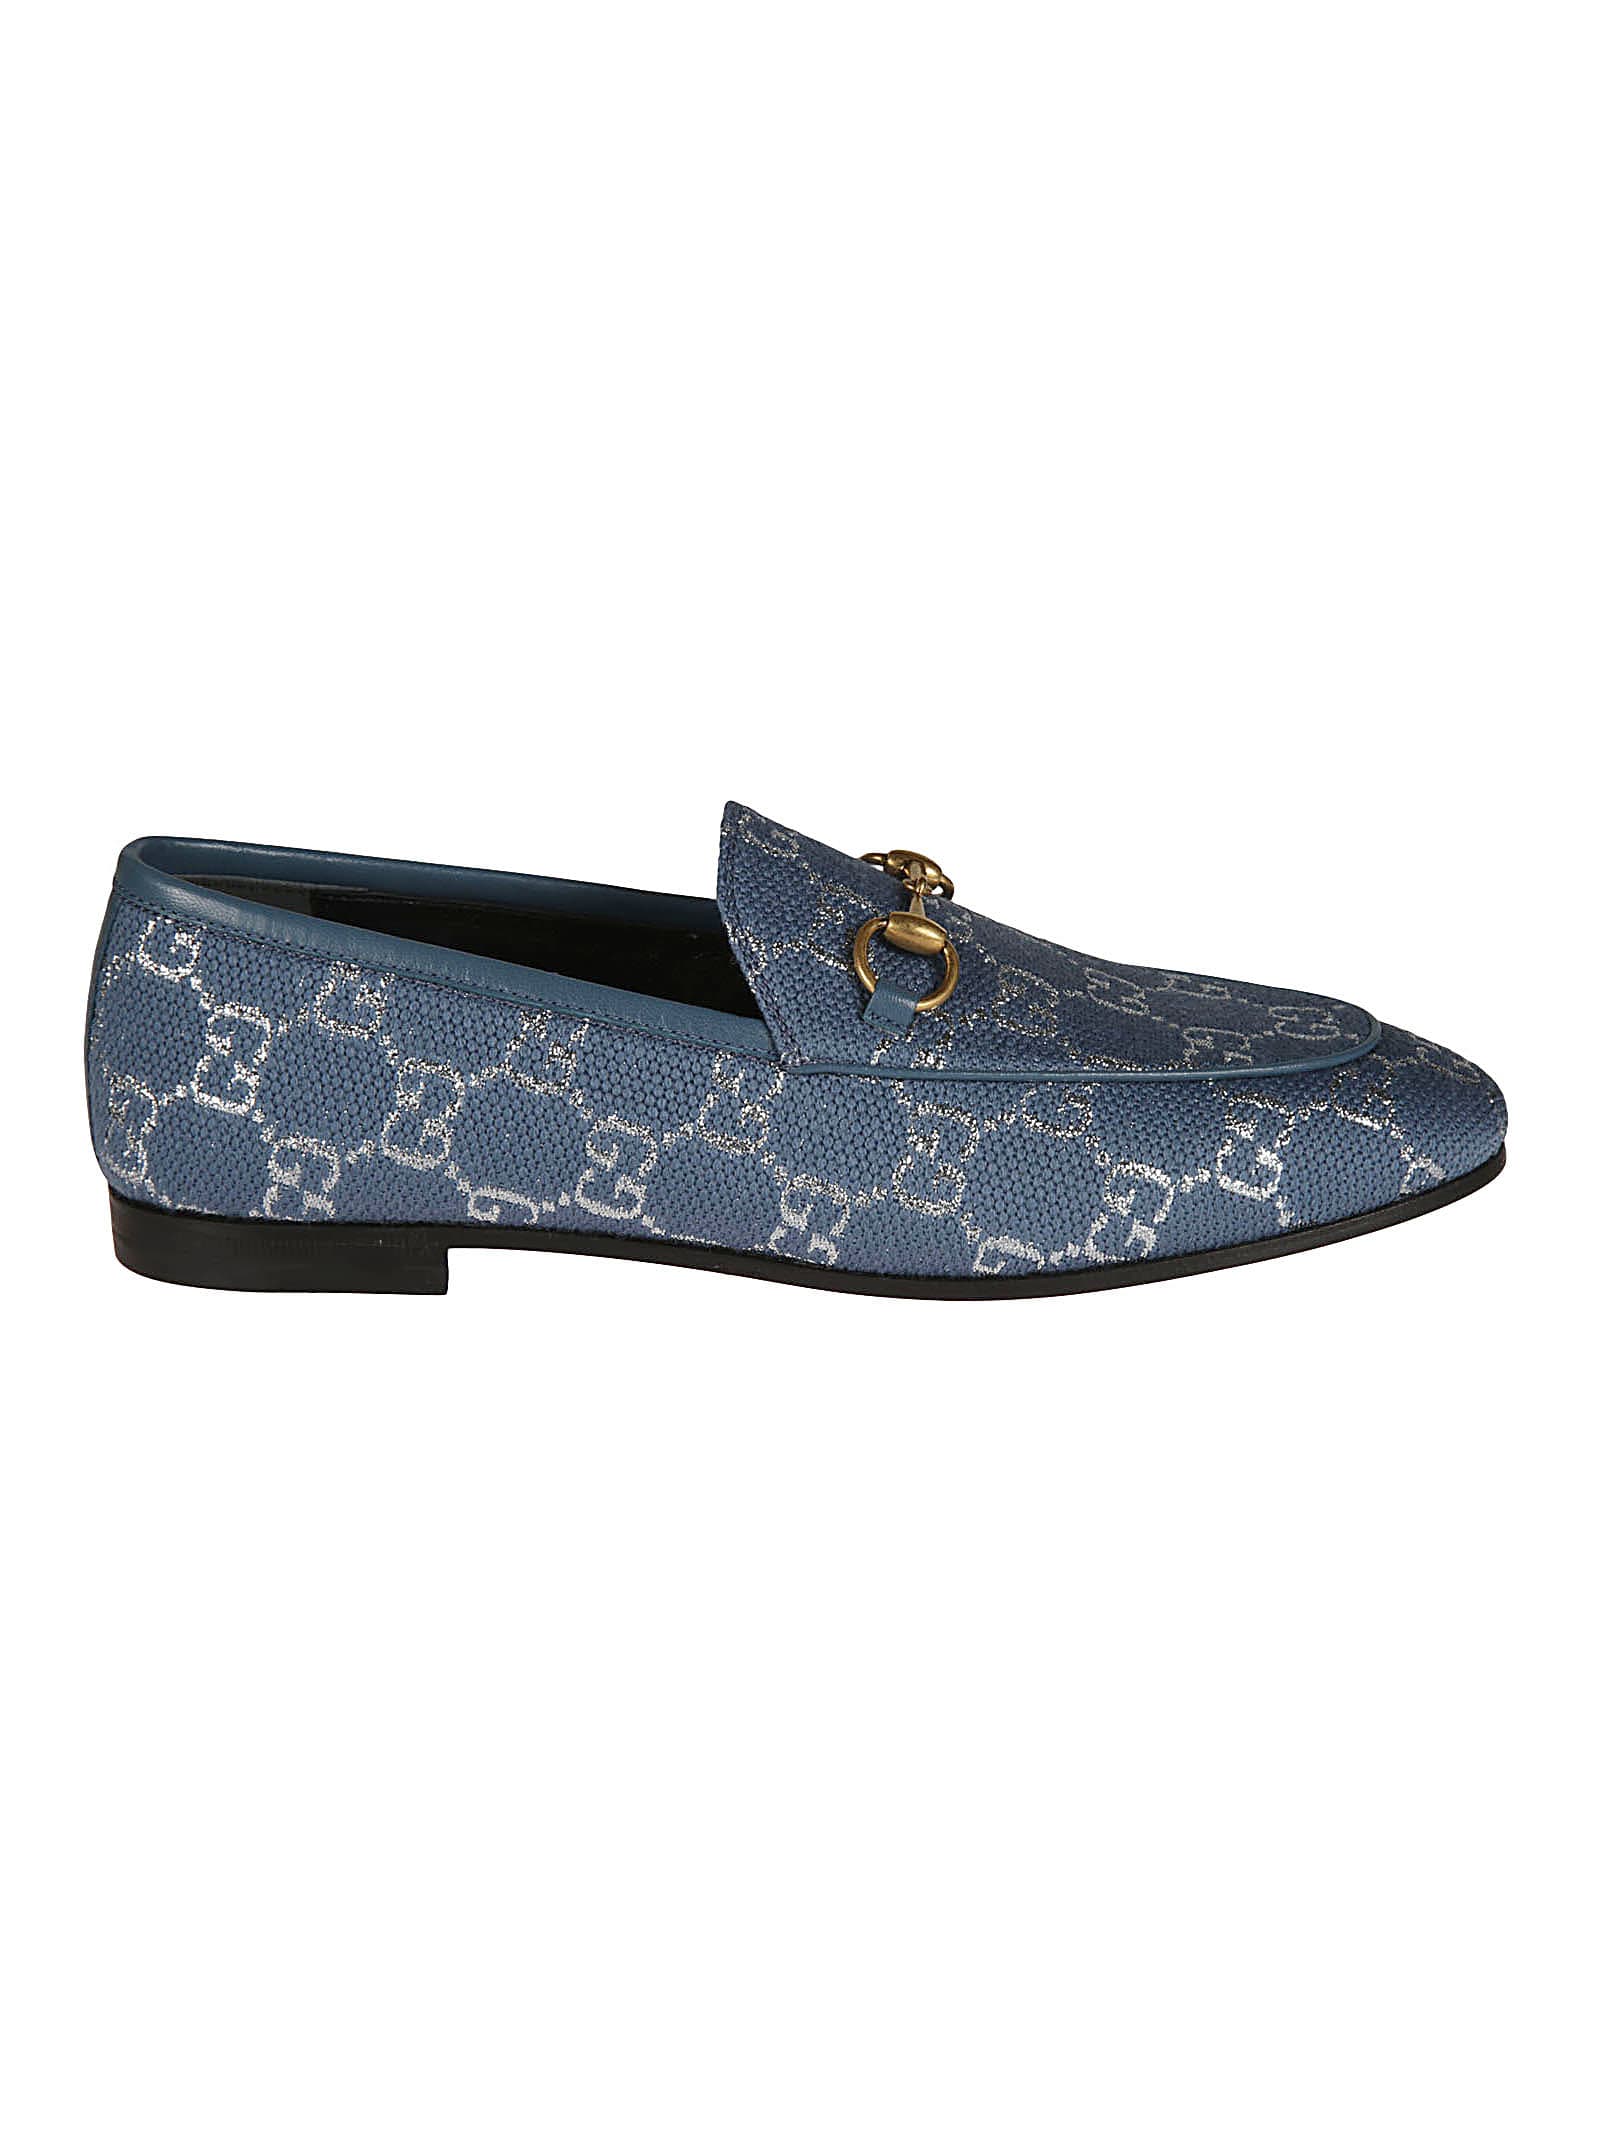 Buy Gucci Light Gg Lame Slippers online, shop Gucci shoes with free shipping